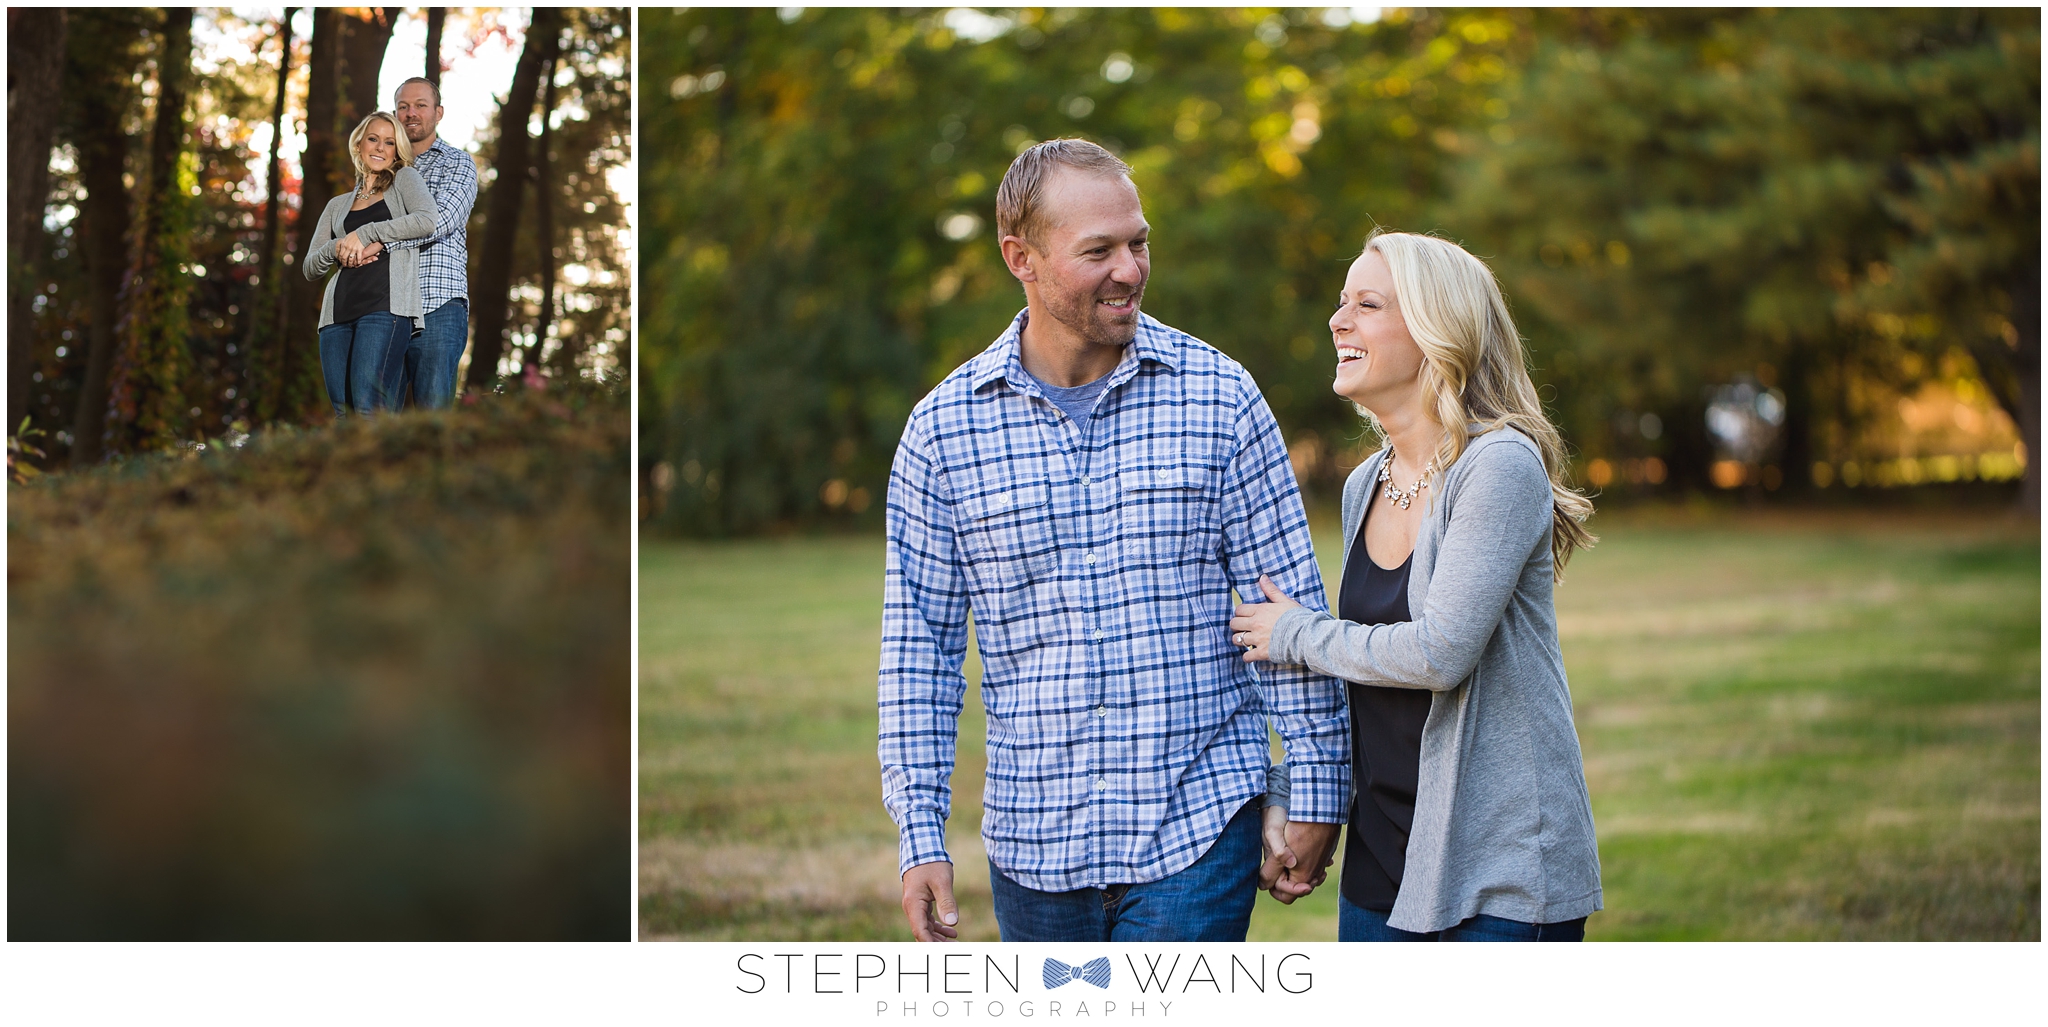 Stephen Wang Photography Connecticut Engagement Session photographer Wadsworth Mansion Park Middletown Autum Fall Foliage CT New Haven-10-23_0006.jpg